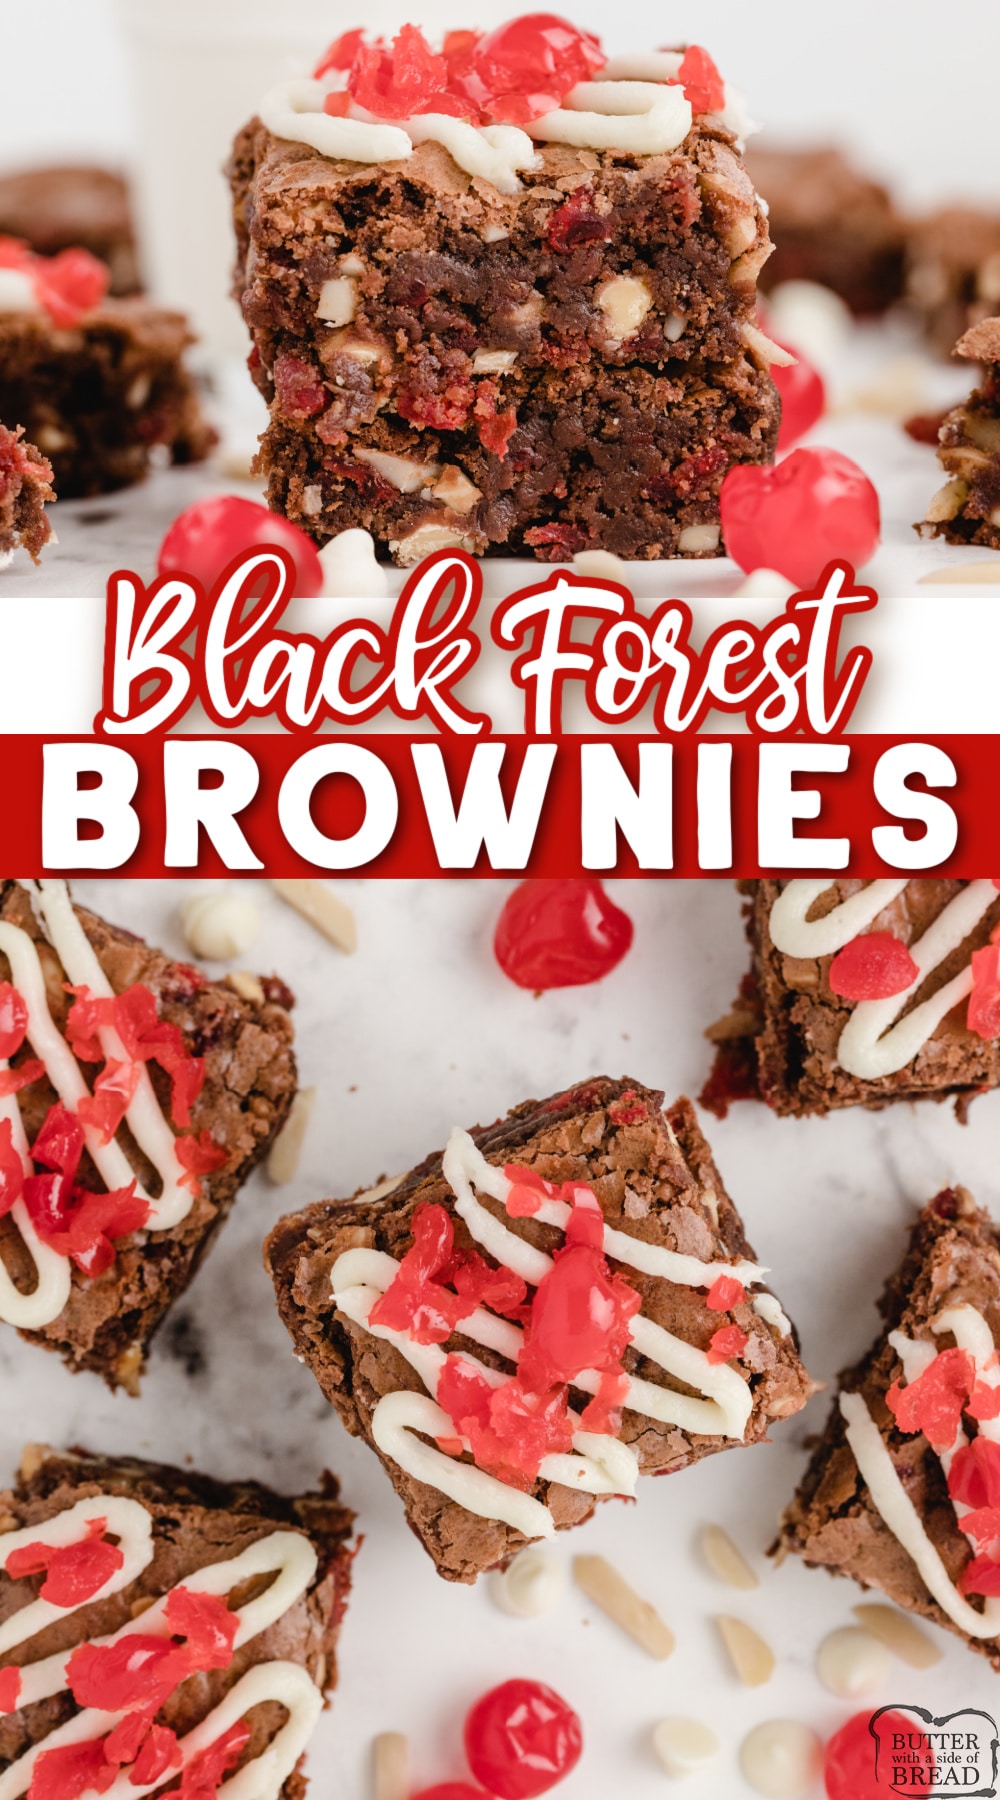 Black Forest Brownies made with a delicious, from-scratch brownie recipe that is mixed with white chocolate chips, chopped cherries and slivered almonds. The brownies are then topped with a cream cheese frosting and more cherries!